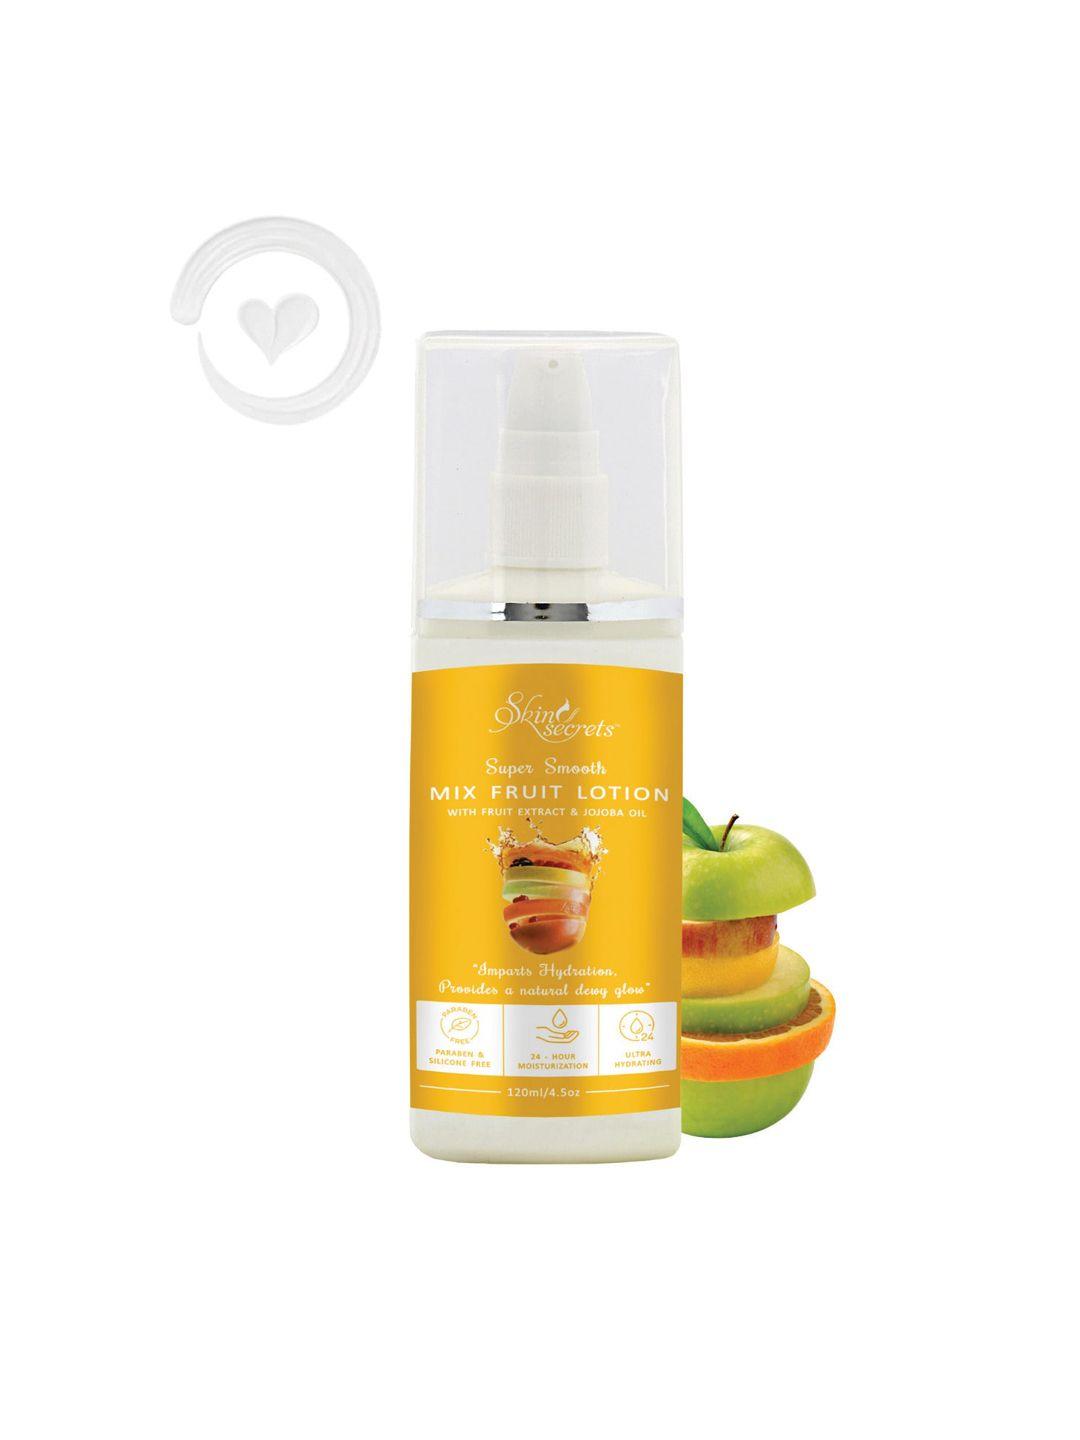 skin secrets super smooth mix fruit body lotion with fruit extract & jojoba oil - 120 ml